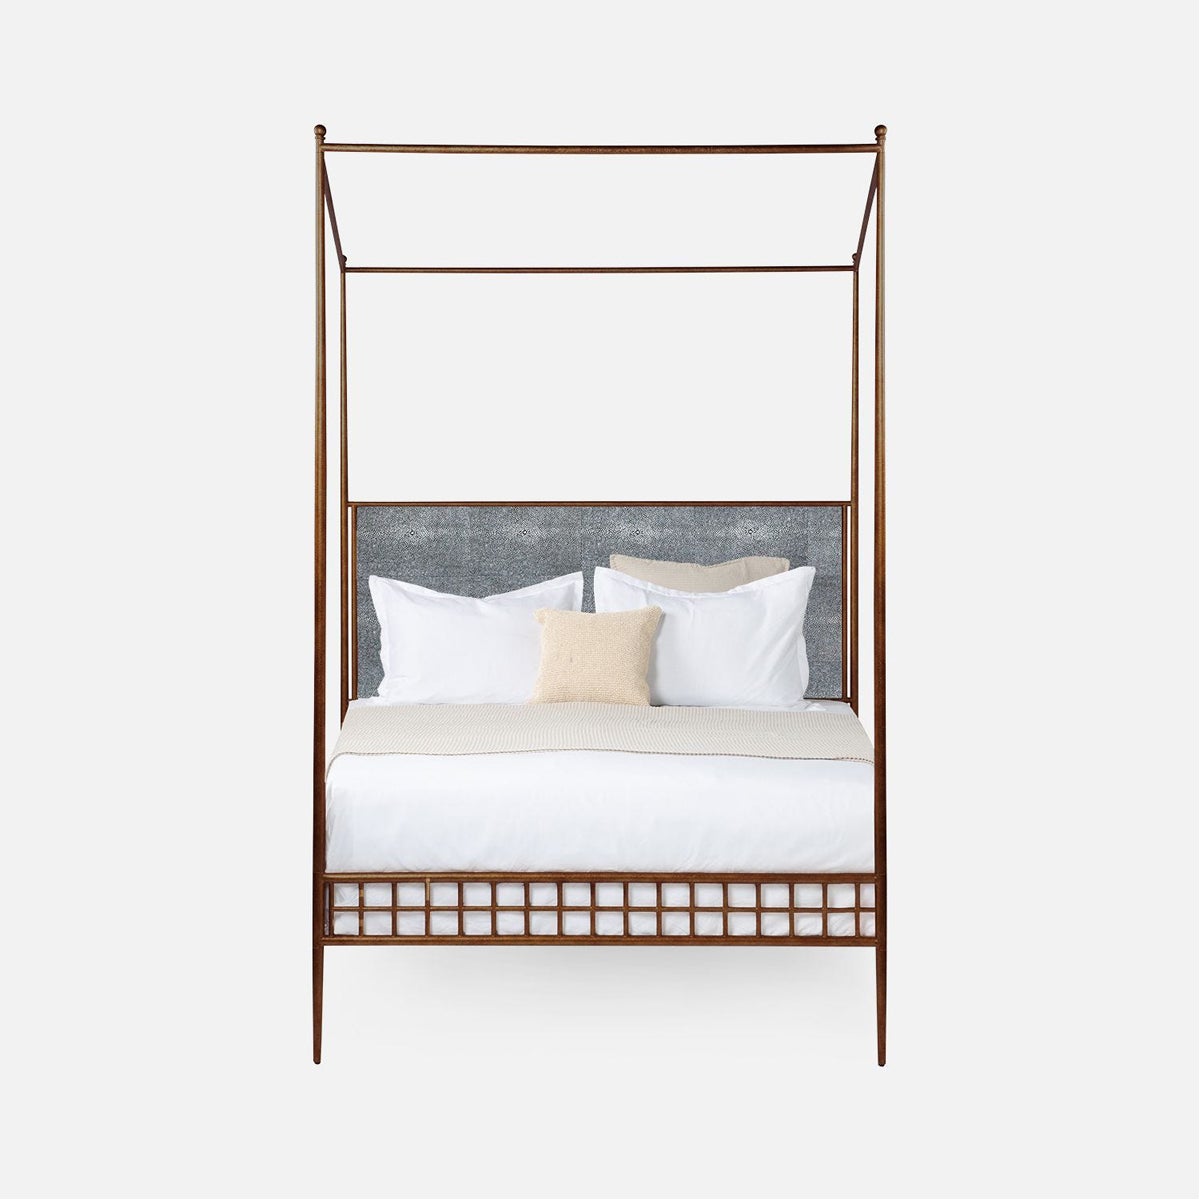 Made Goods Hamilton Textured Iron Canopy Bed in Weser Fabric